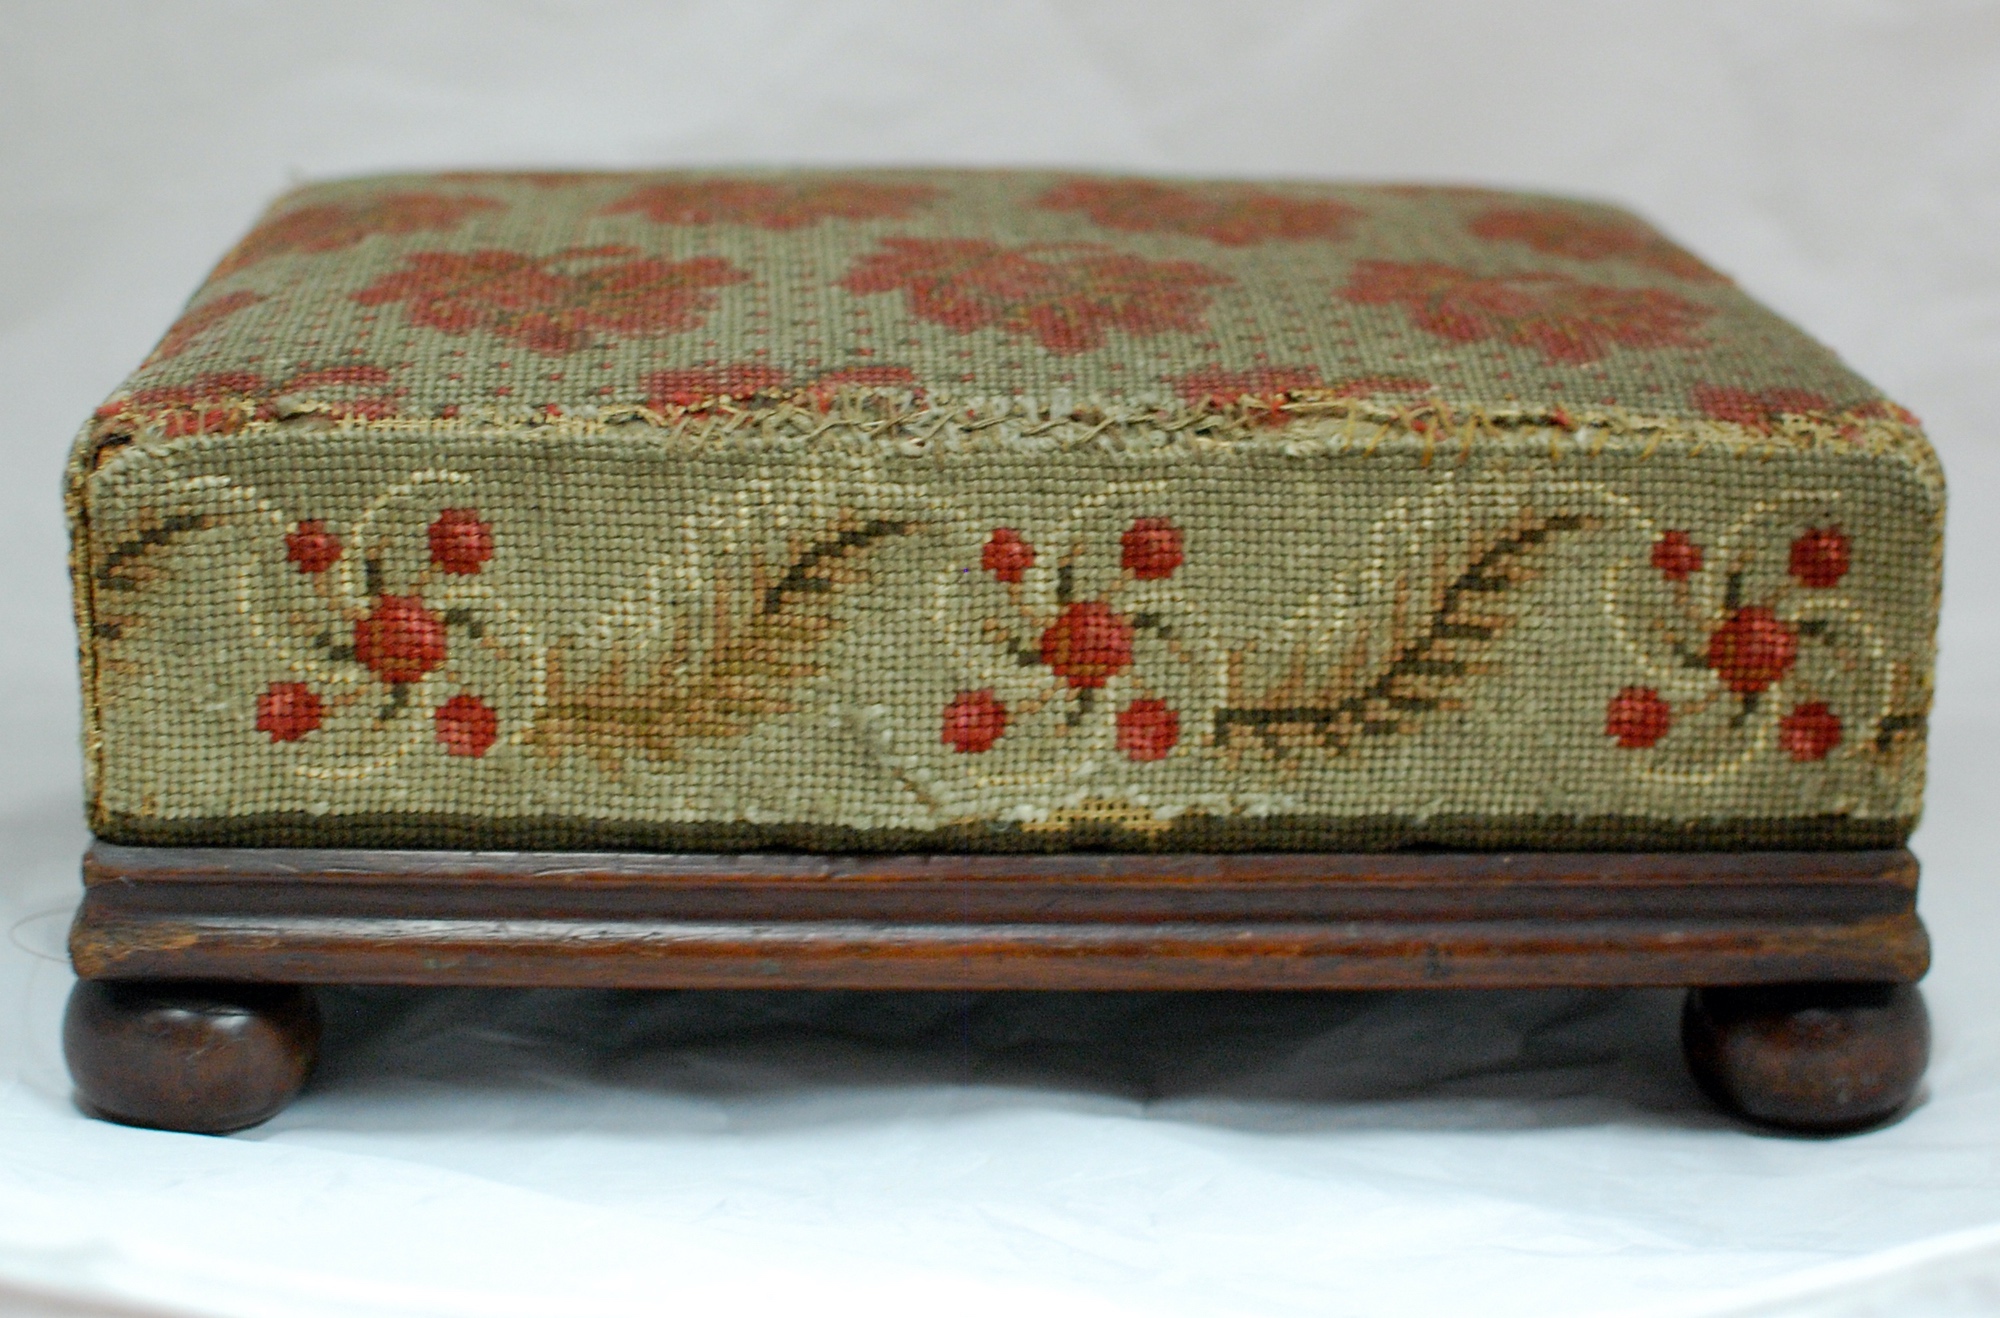 Side view of a wooden footstool with embroidered cushion. It is embroidered with a red flower pattern.